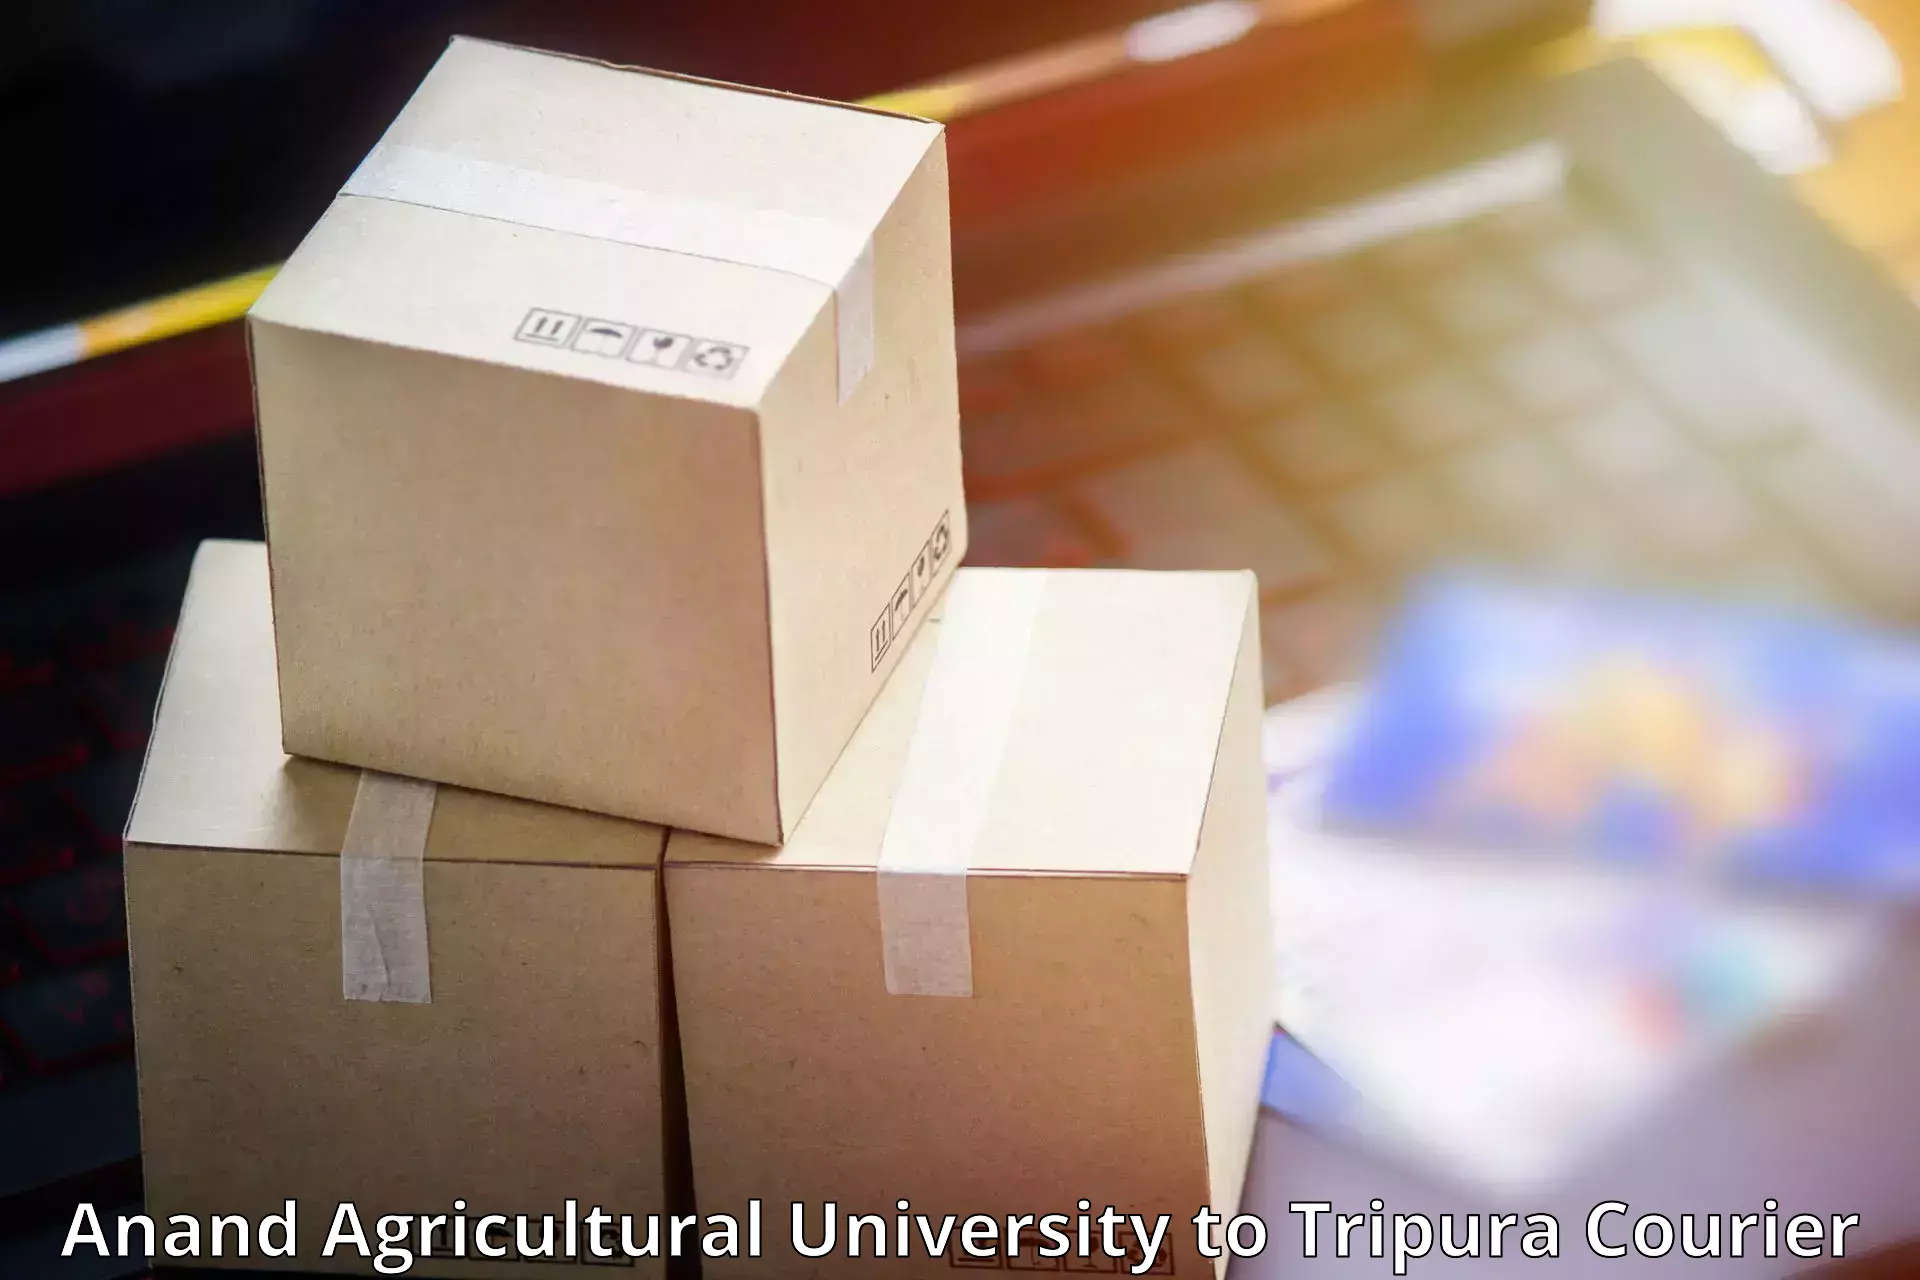 24/7 shipping services Anand Agricultural University to Tripura